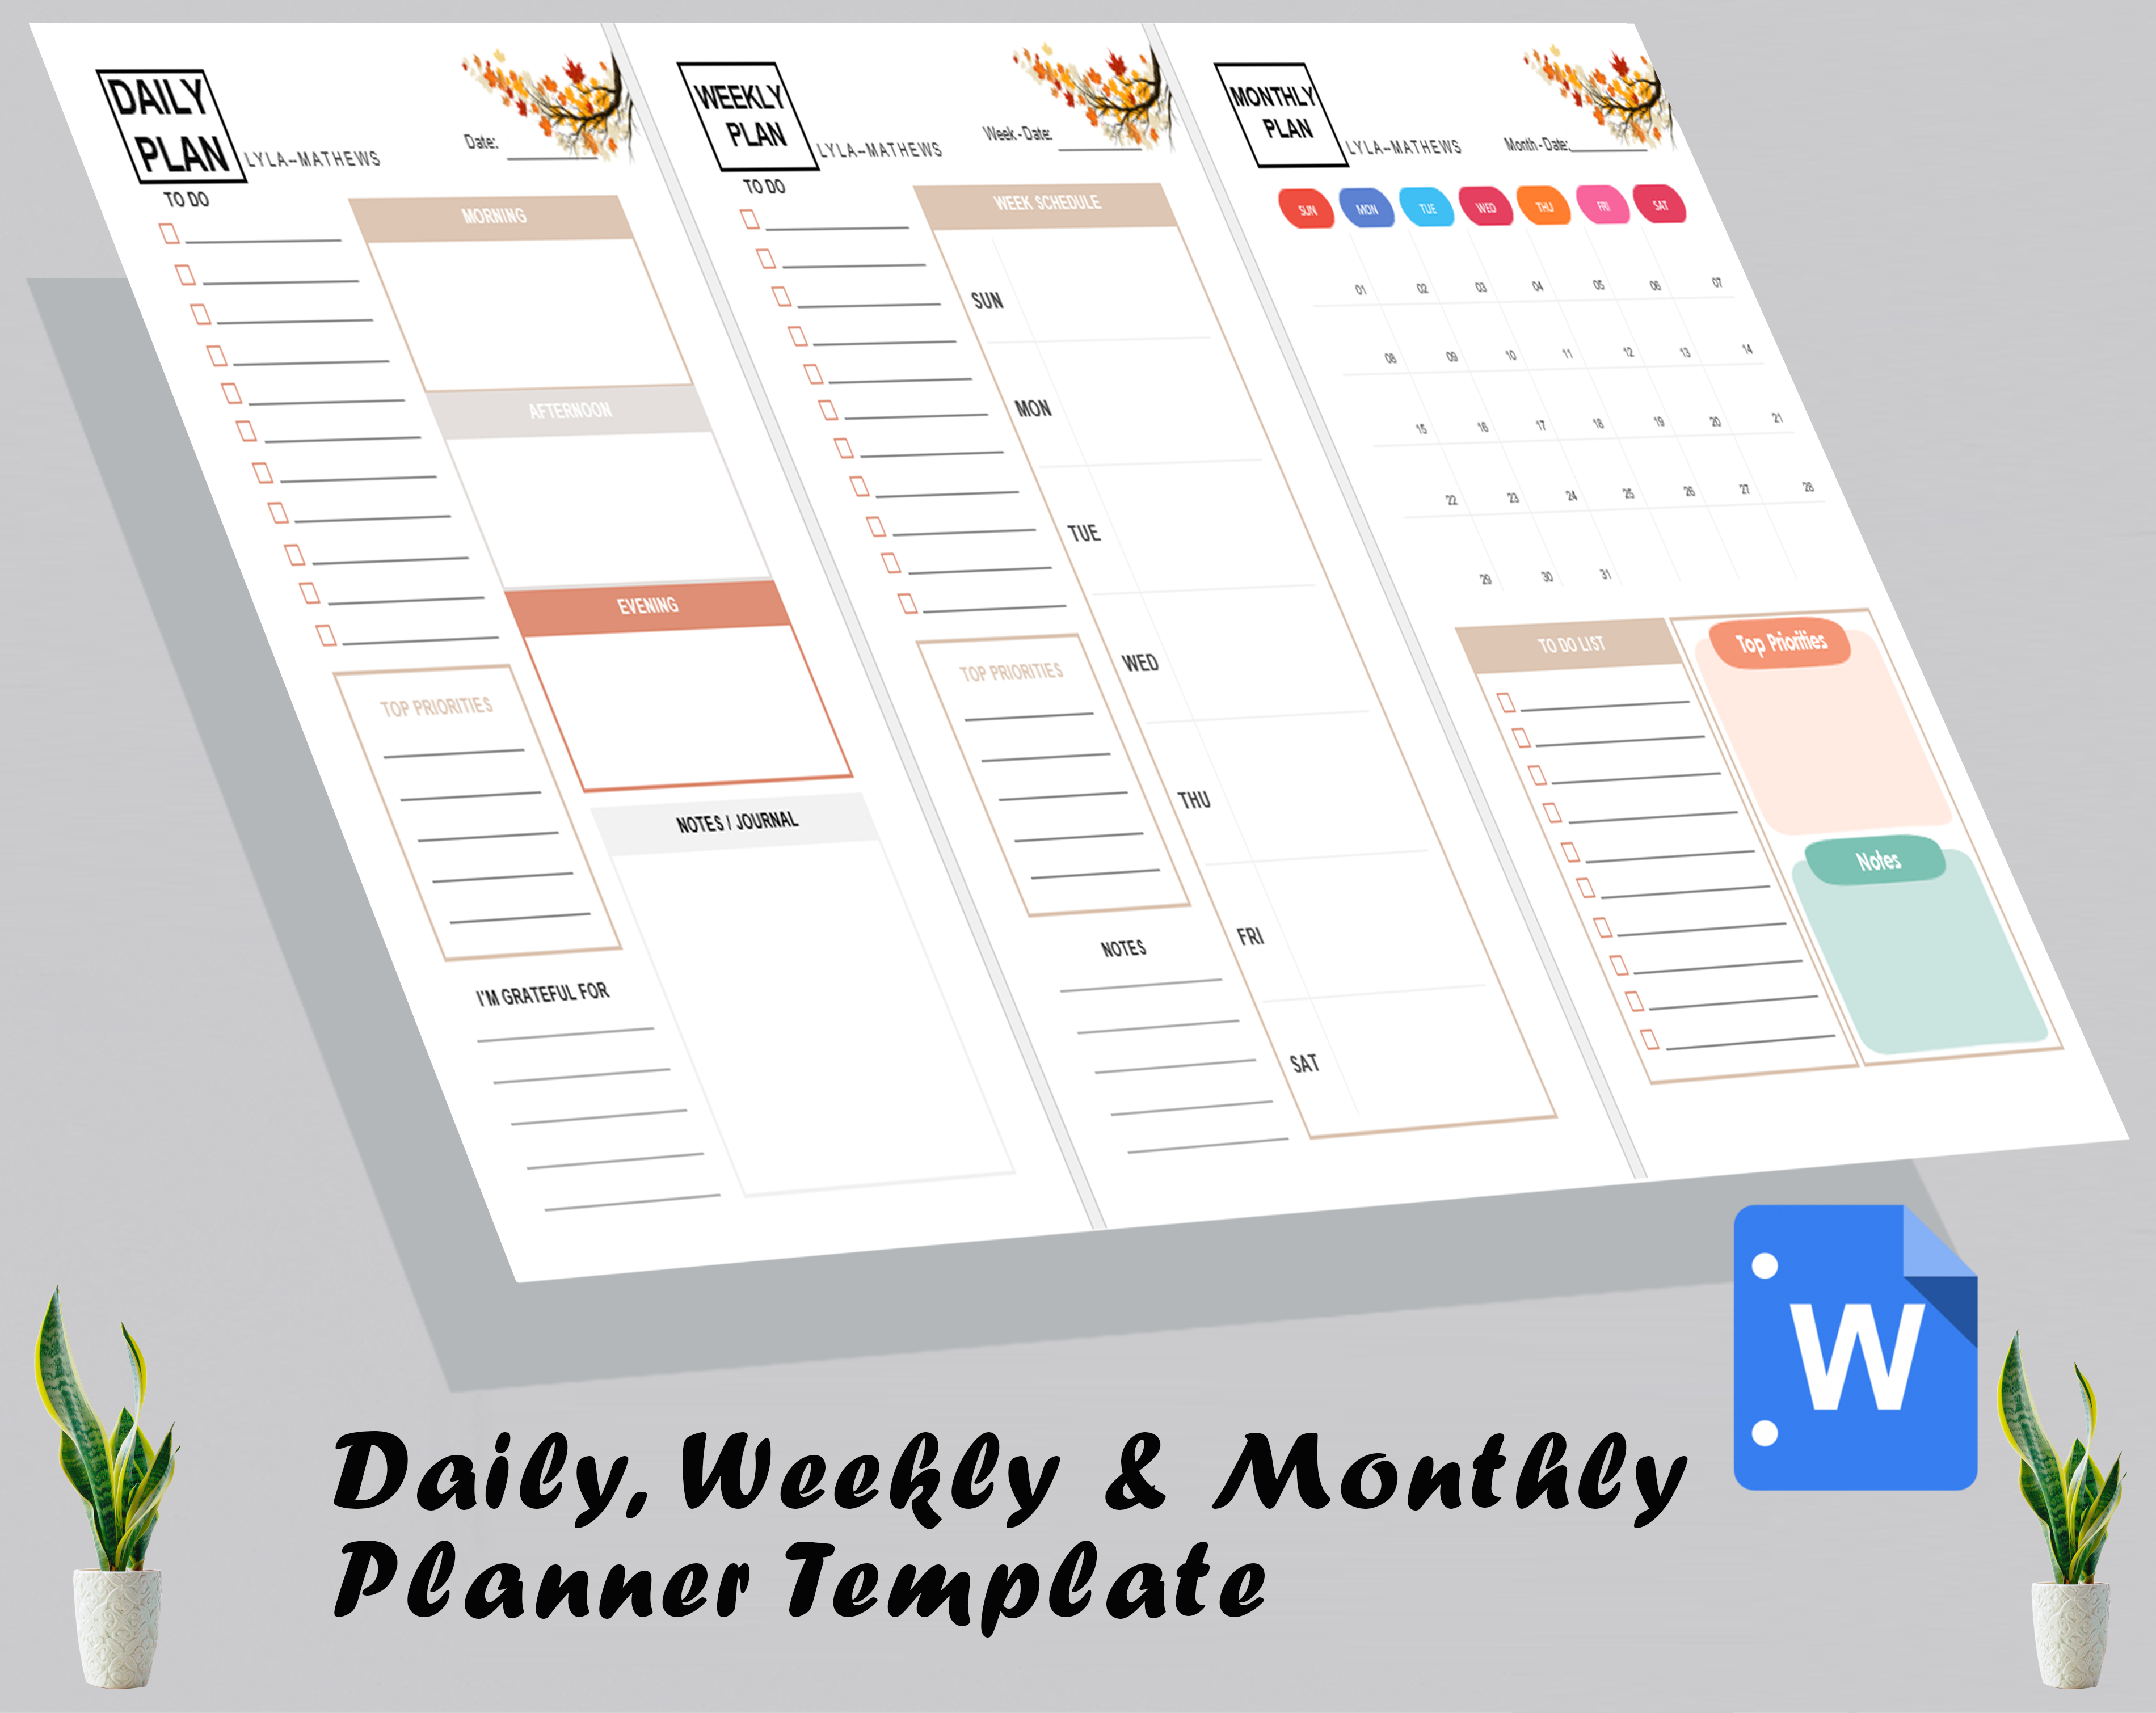 Daily, Weekly & Monthly Planner Template